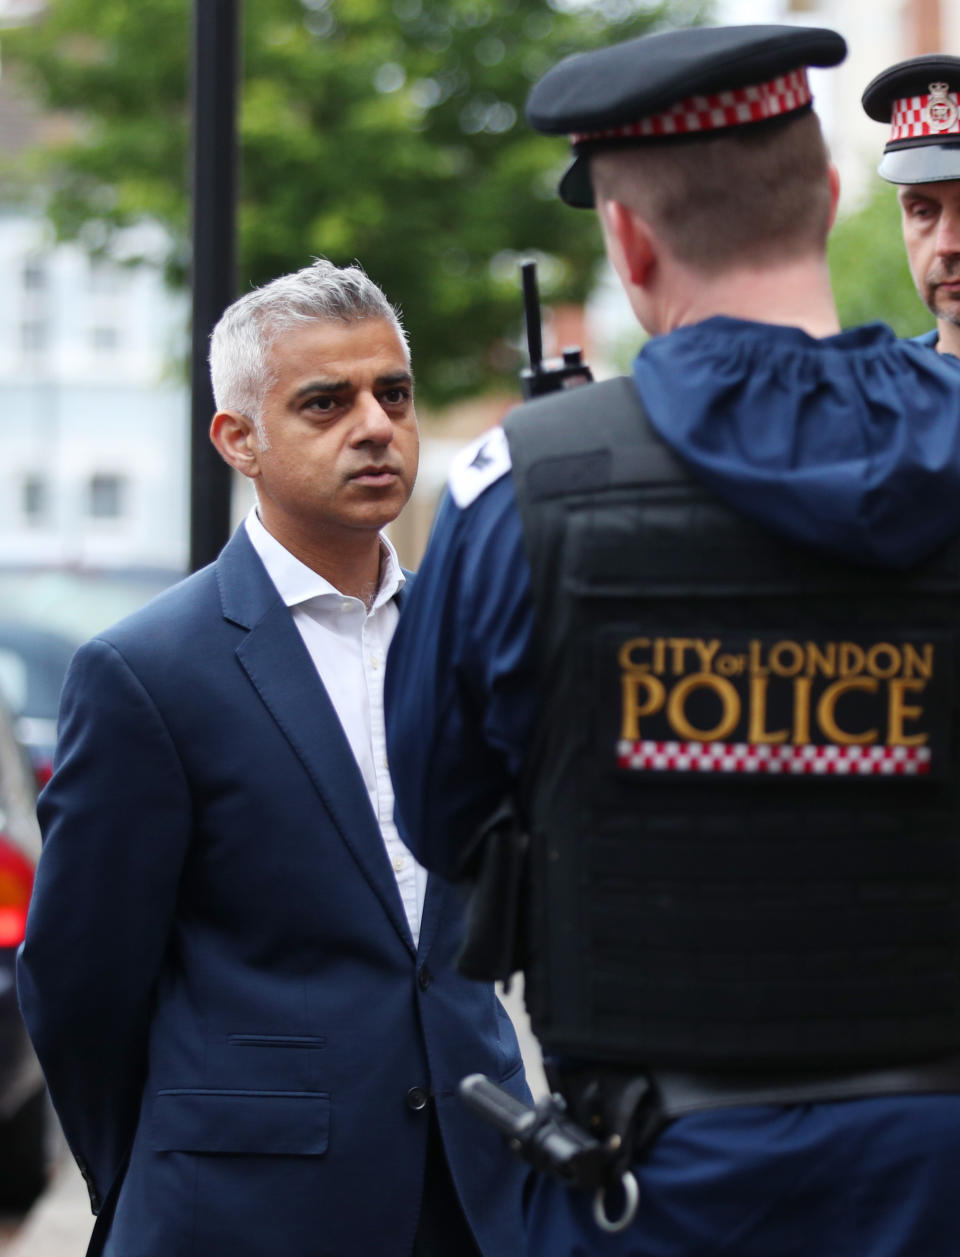 In 2017, Sadiq Khan closed 38 police station front counters to save £8m per year (Yui Mok/PA)